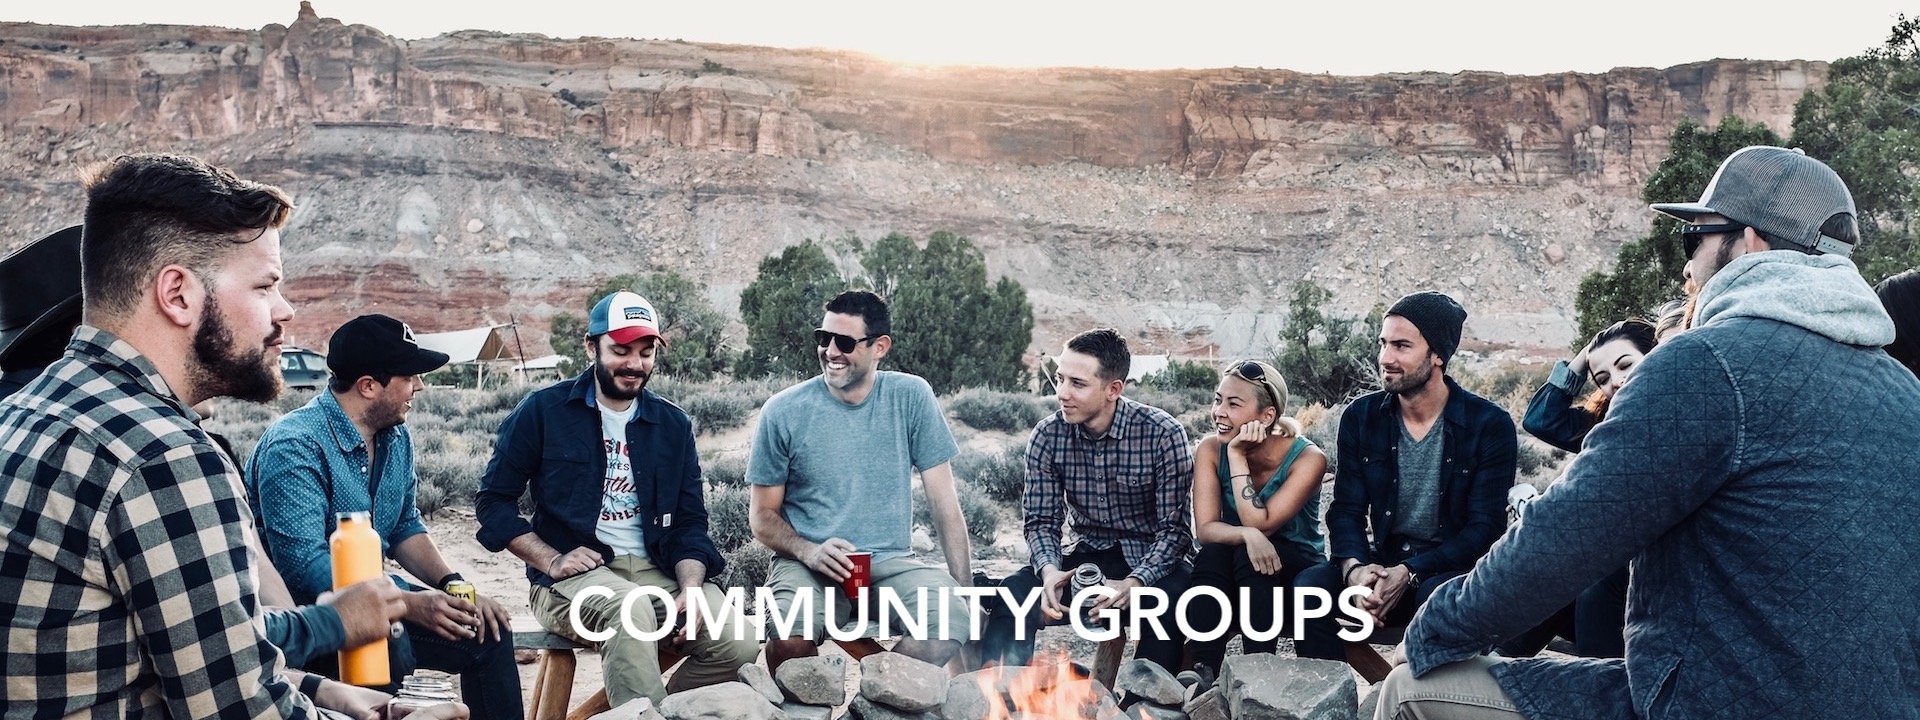 Community Groups page Banner.jpg